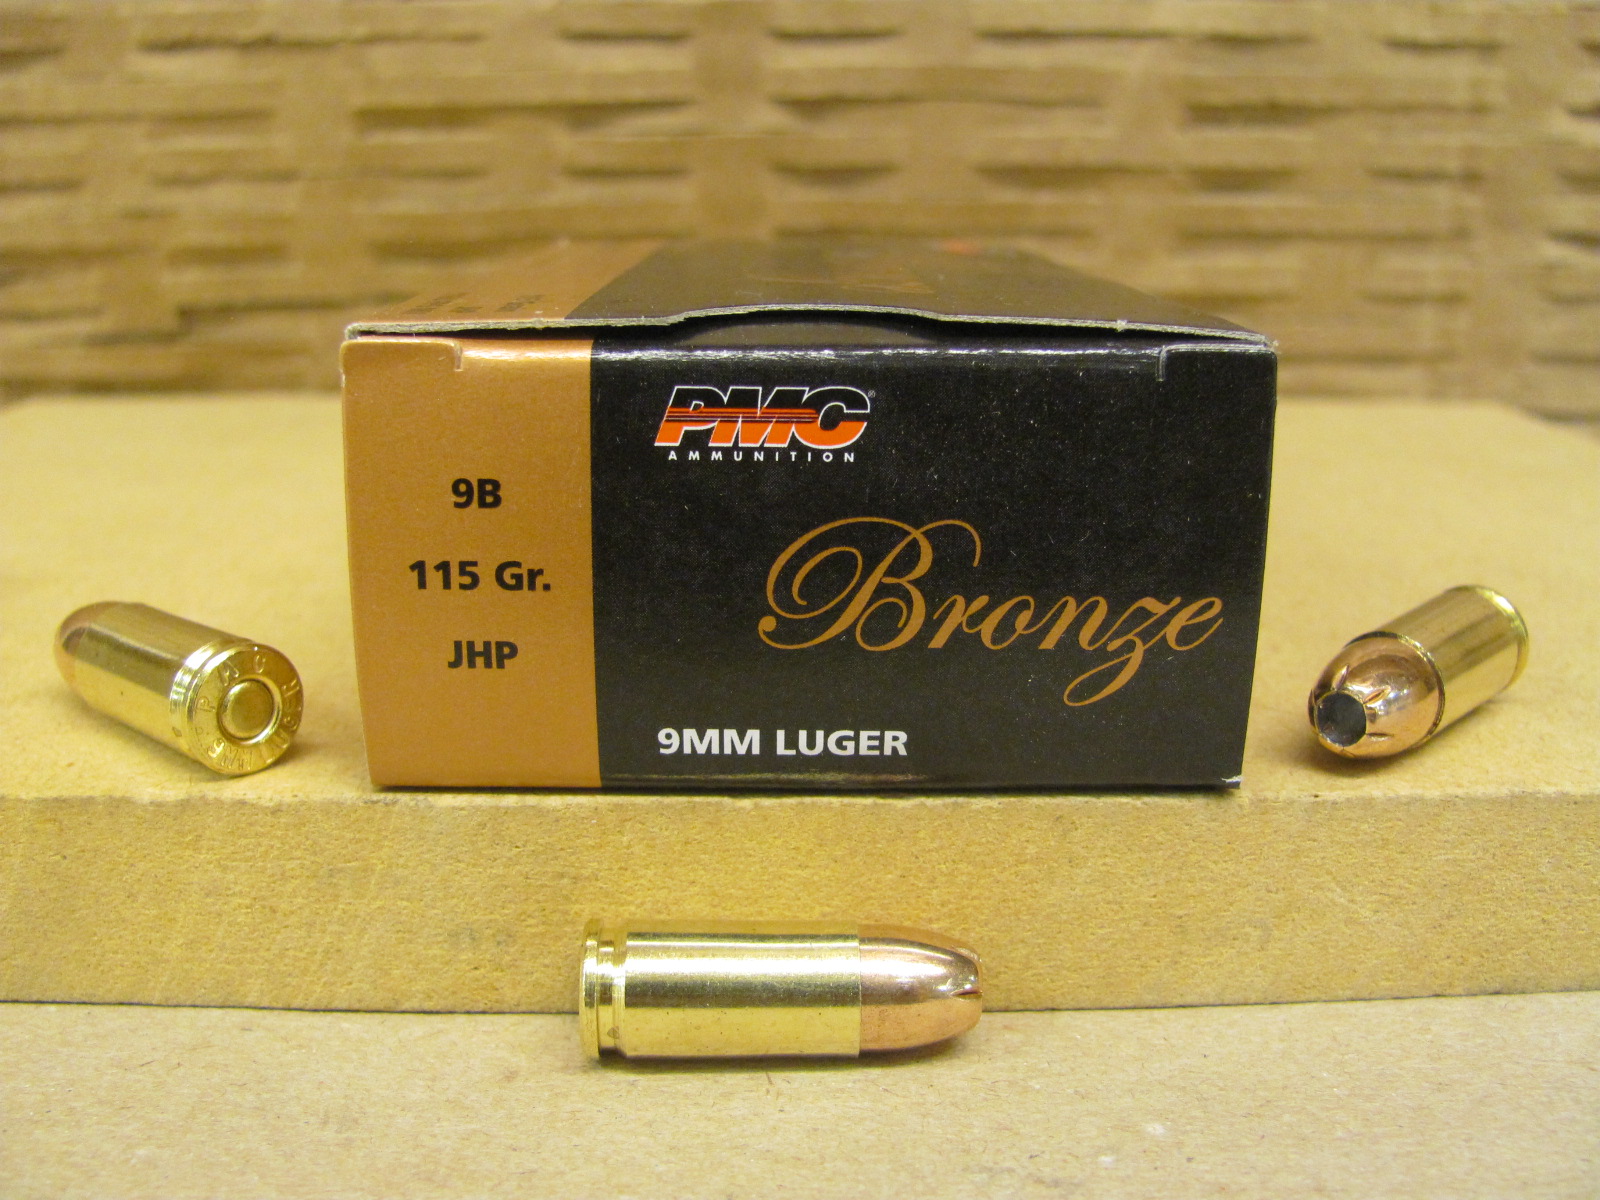 50 Round Box - 9mm Luger Jacketed Hollow Point 115 Grain PMC Ammo - 9B ...